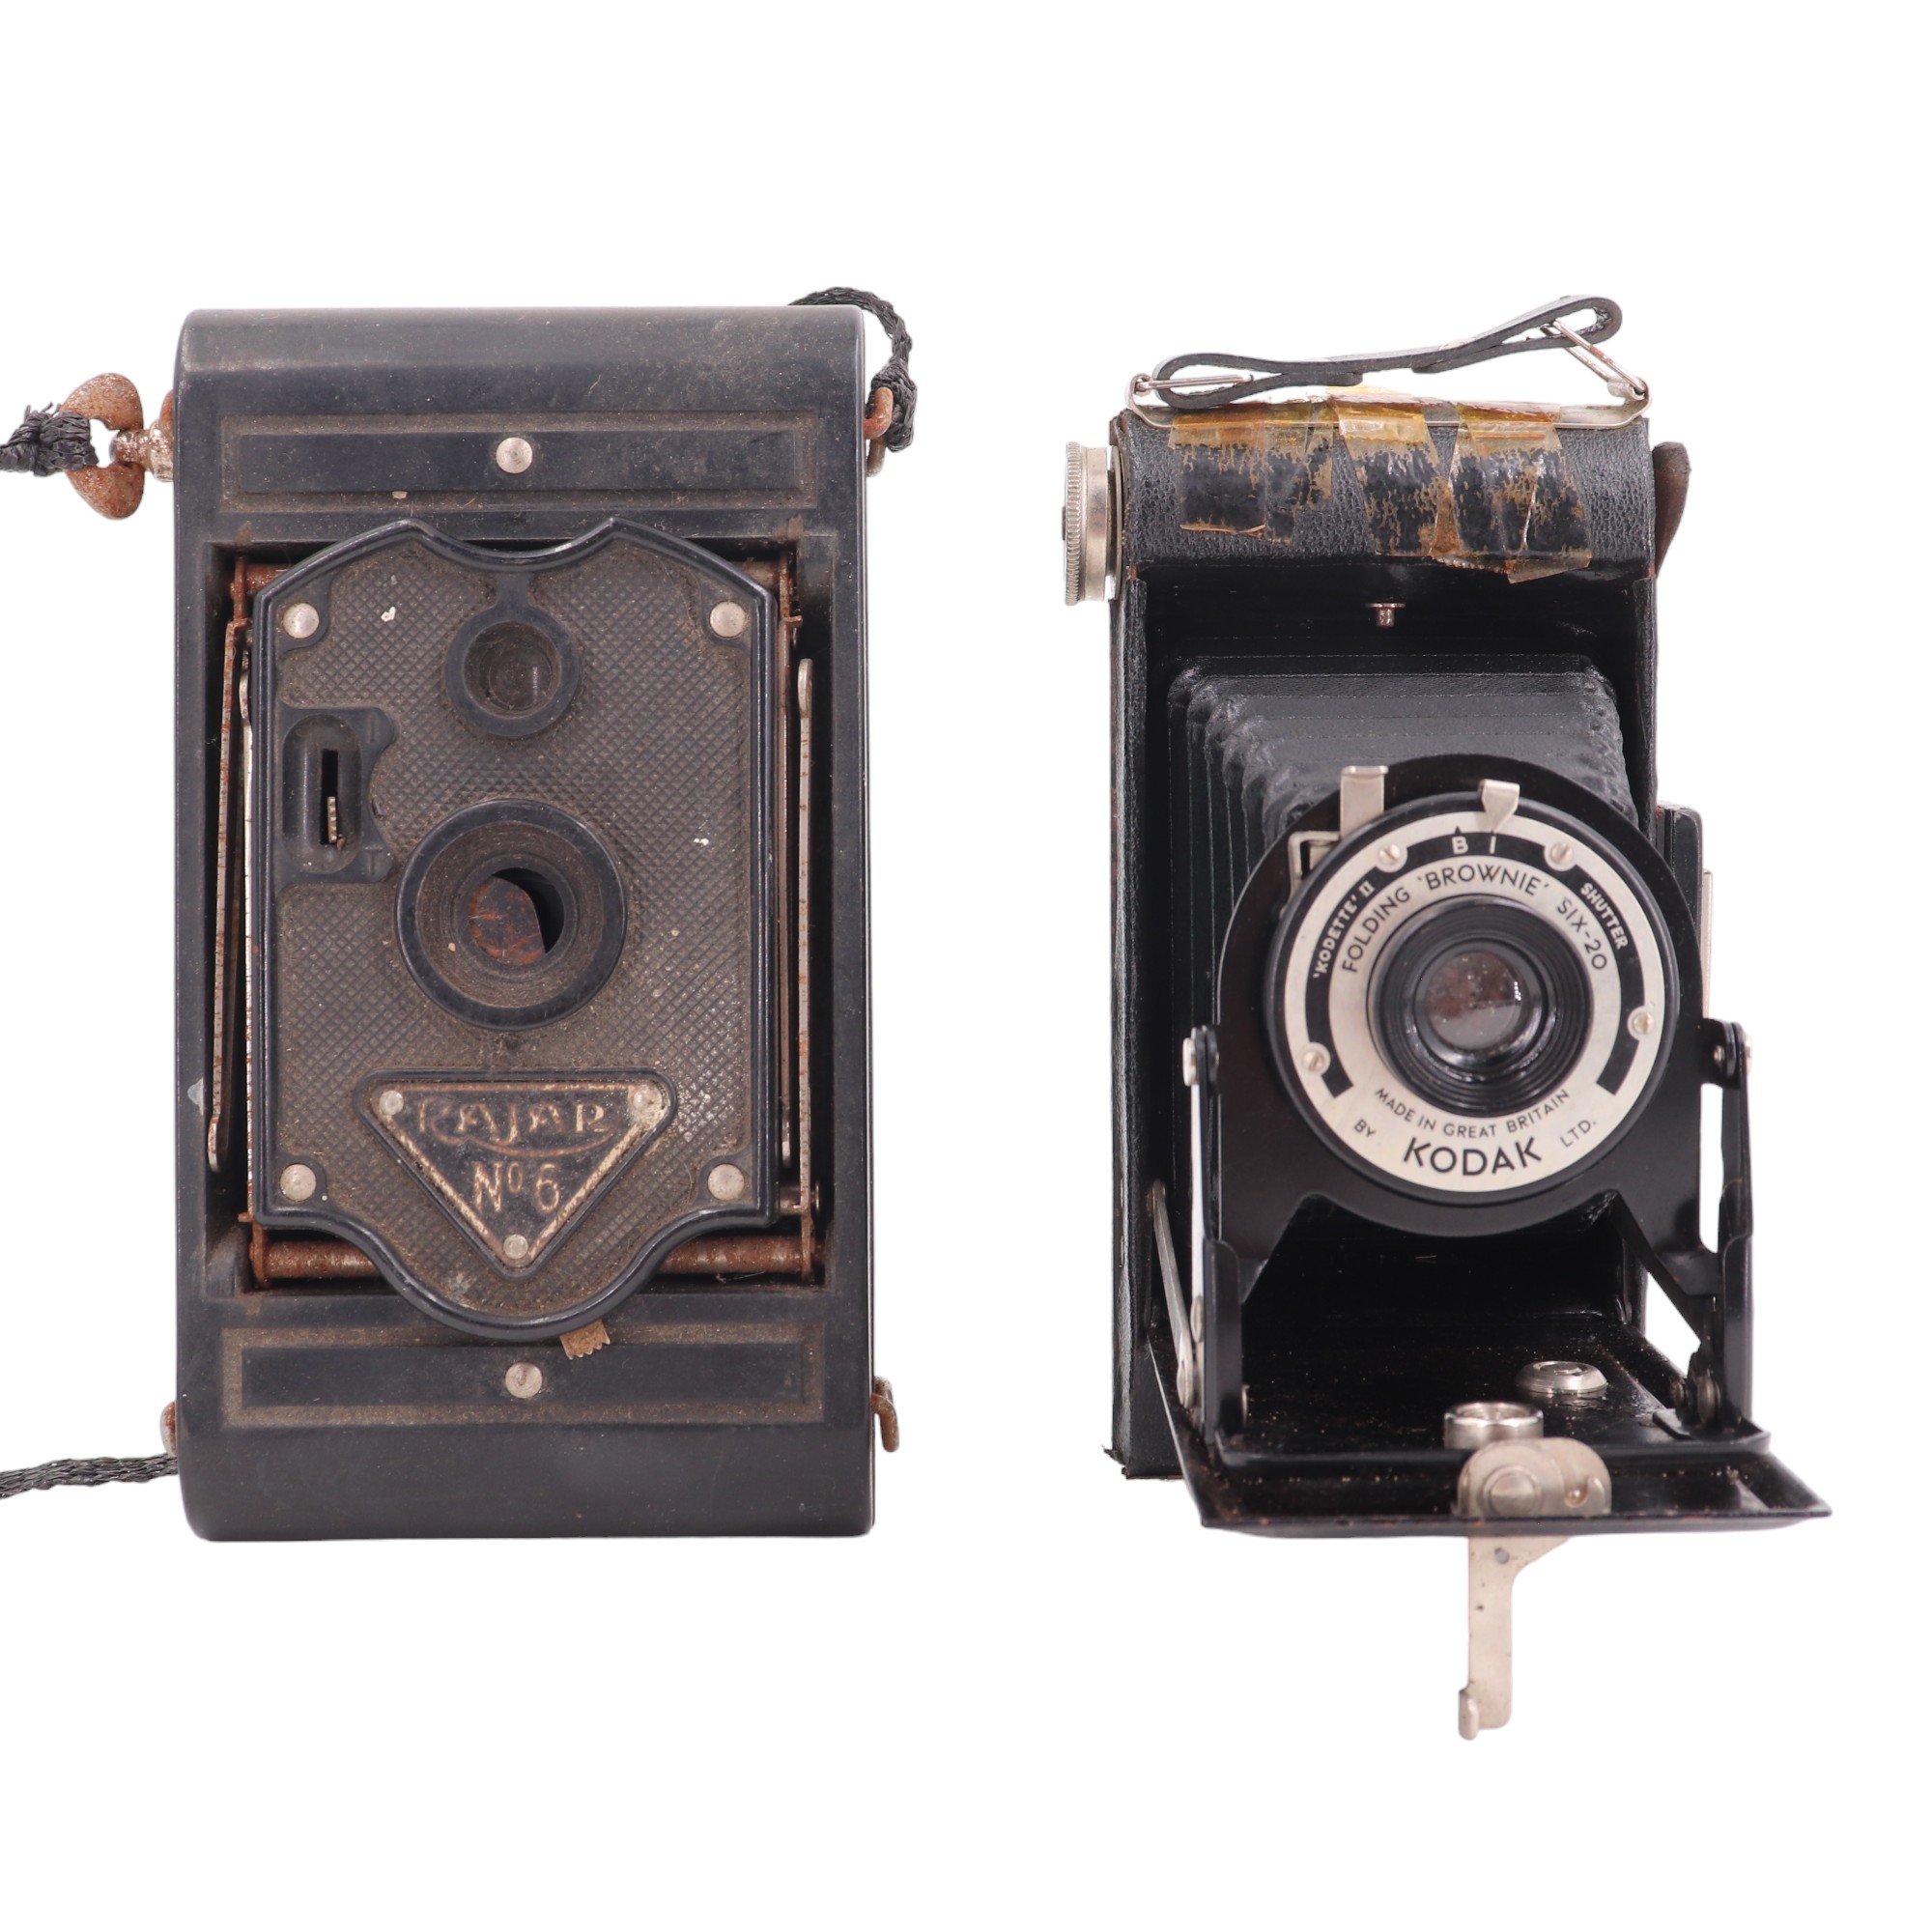 Two 1930s folding roll-film cameras comprising a cased Kodak Folding Brownie Six-20 and a Rajar No